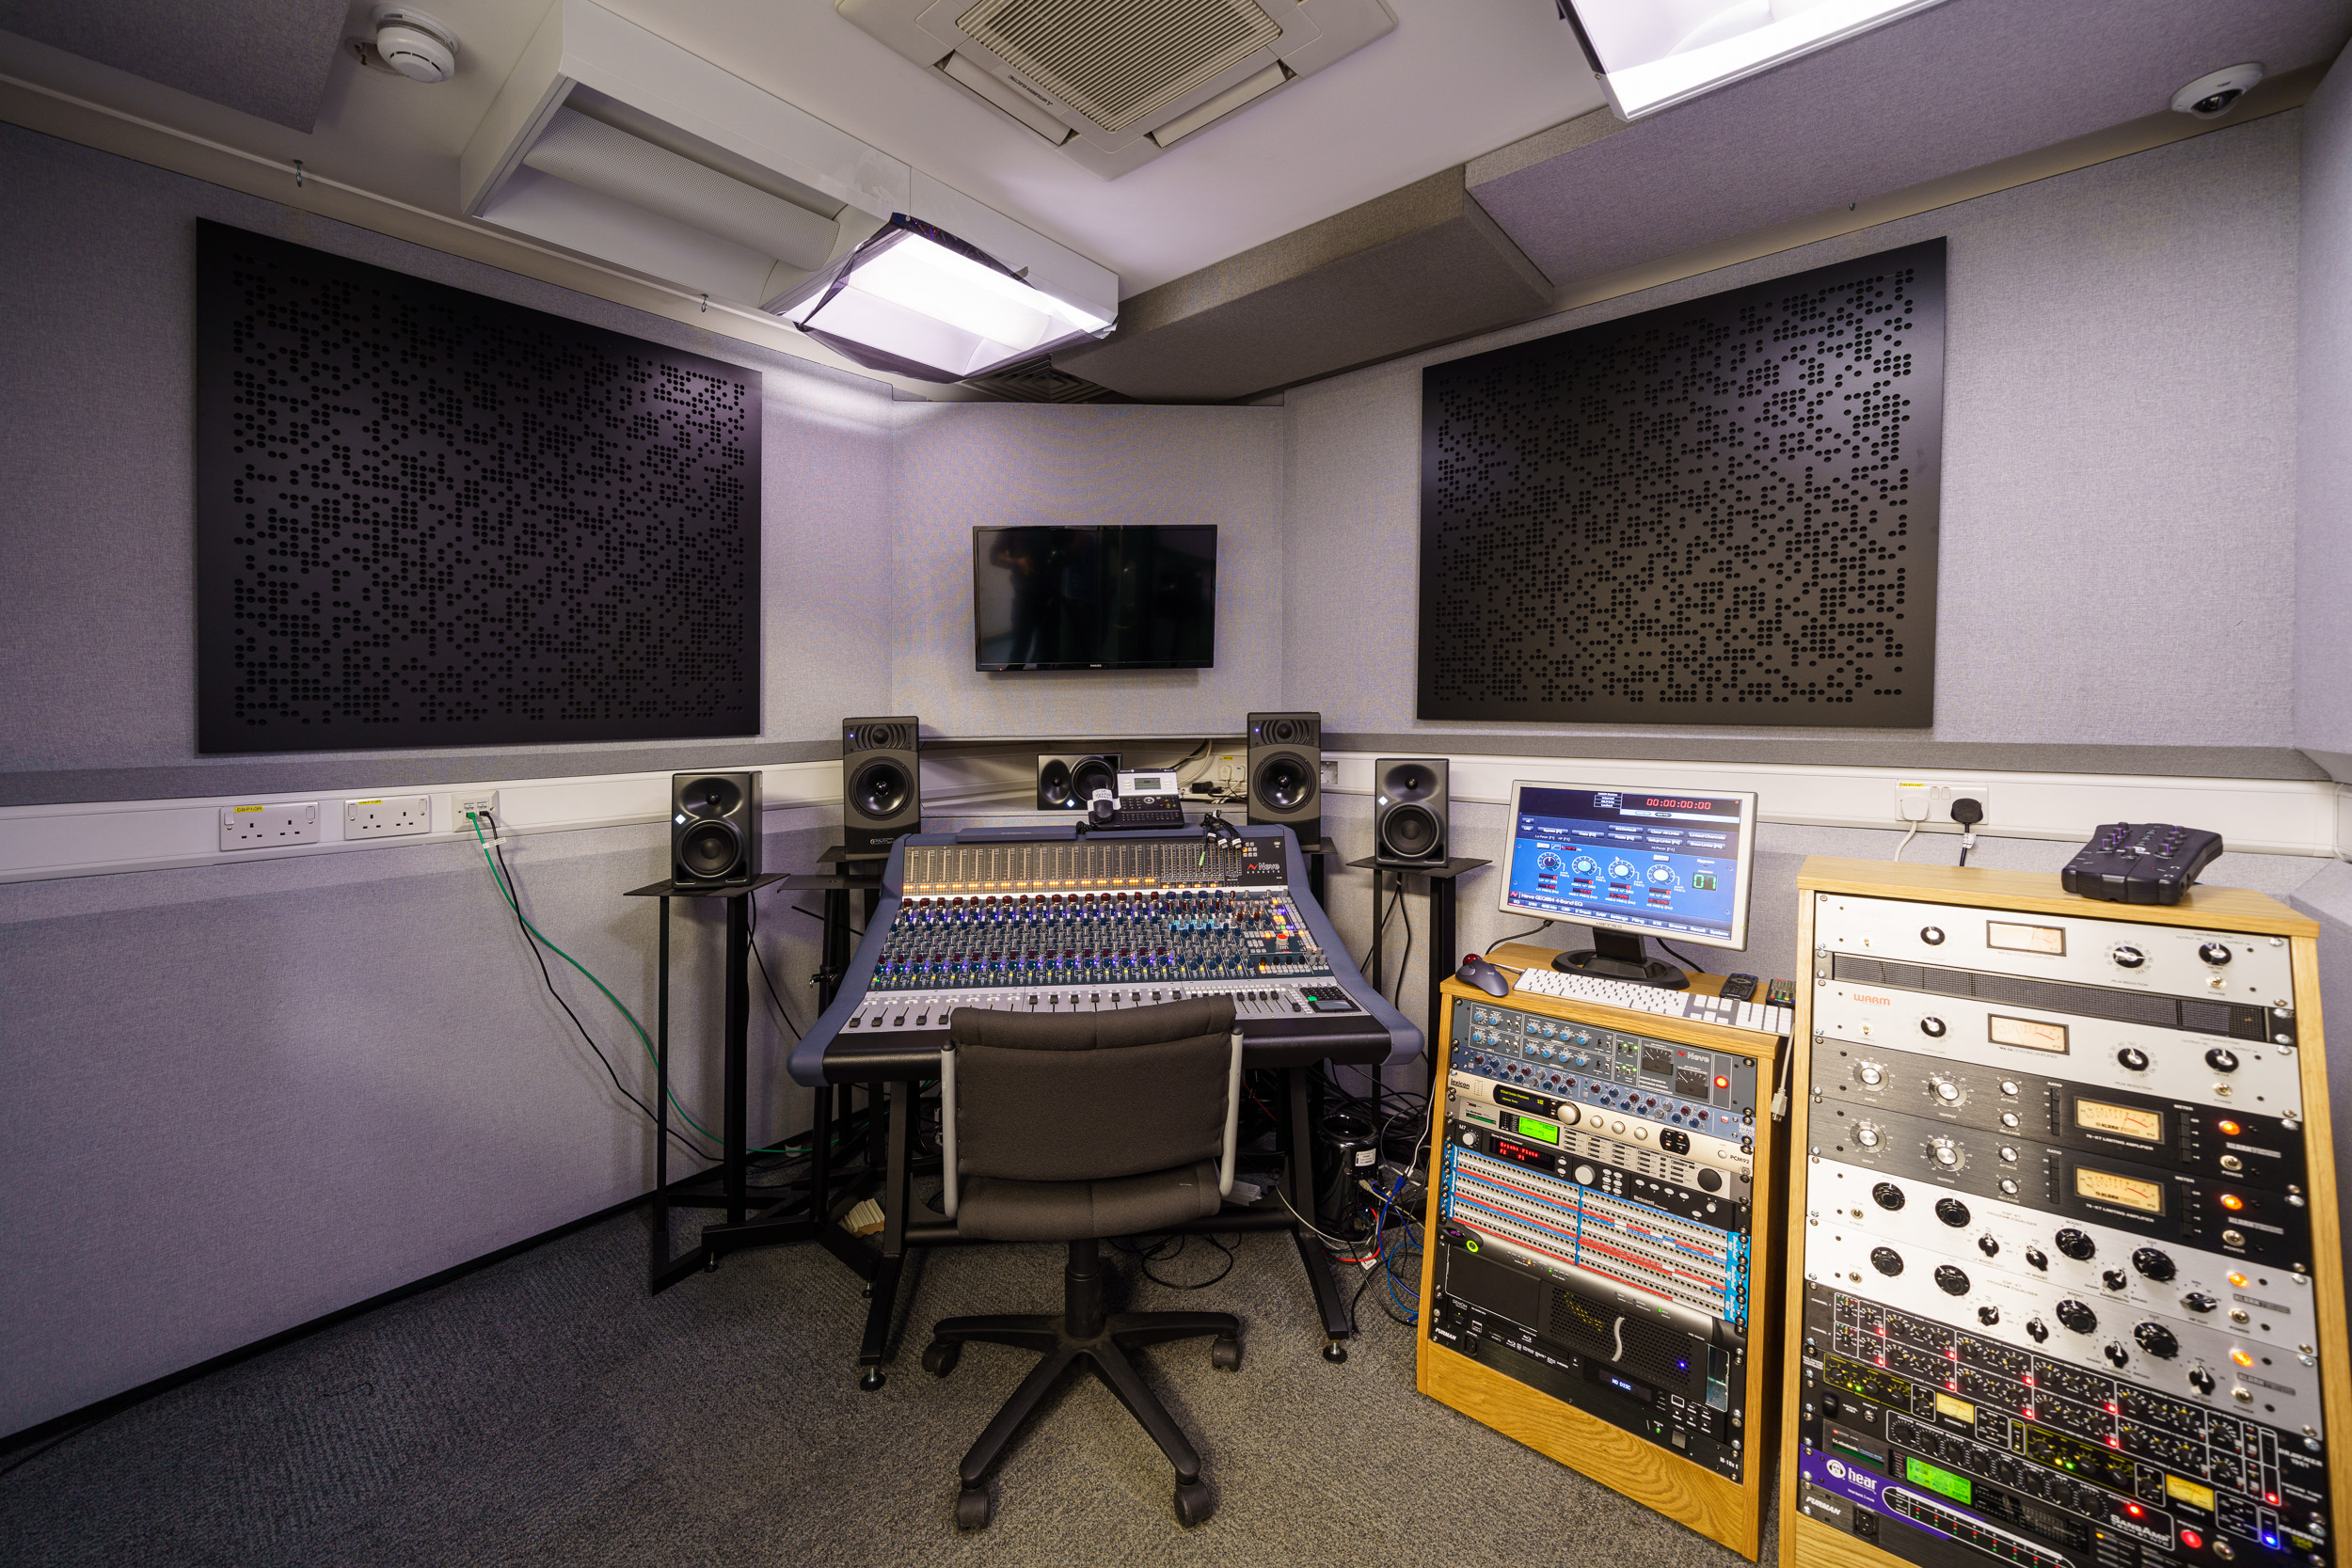 Studio 2 including a control station and surround sound